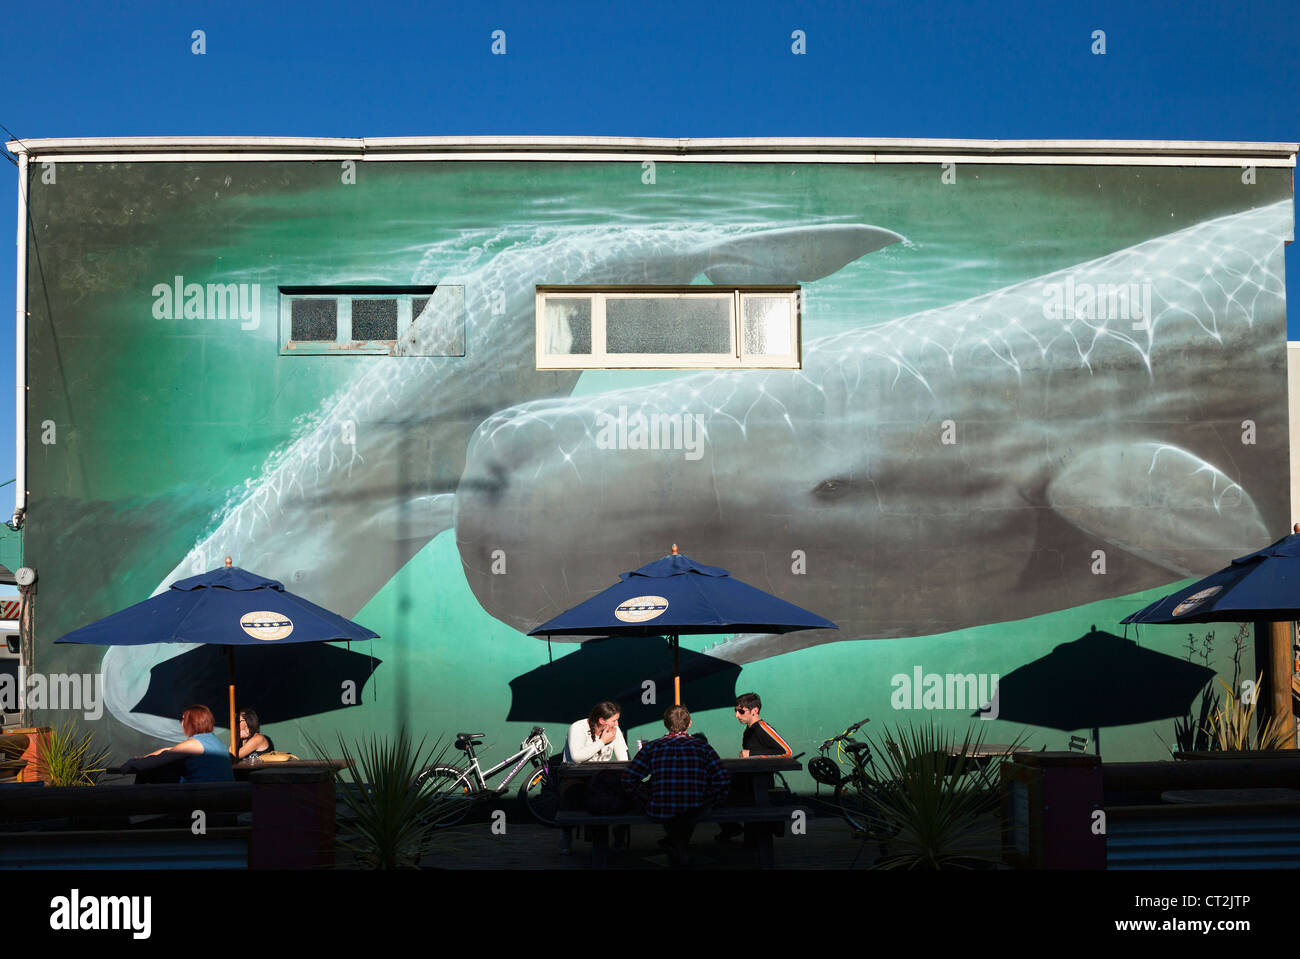 Whale-watching mural at restaurant in Kaikoura, South Island of New Zealand 2 Stock Photo